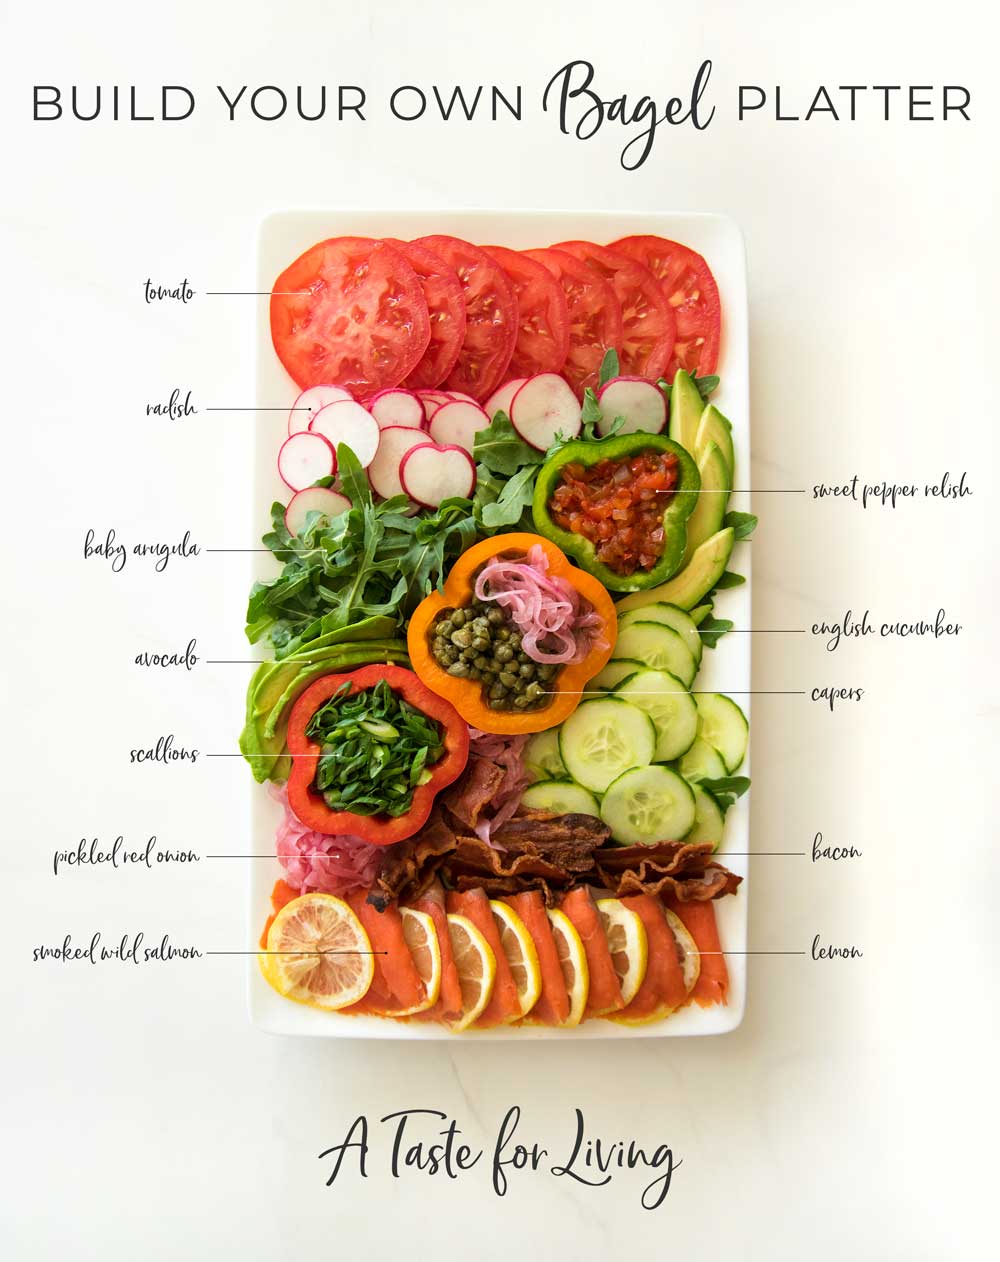 Build Your Own Bagel Platter | The Art of the Platter | By Jessica Brand of A Taste for Living